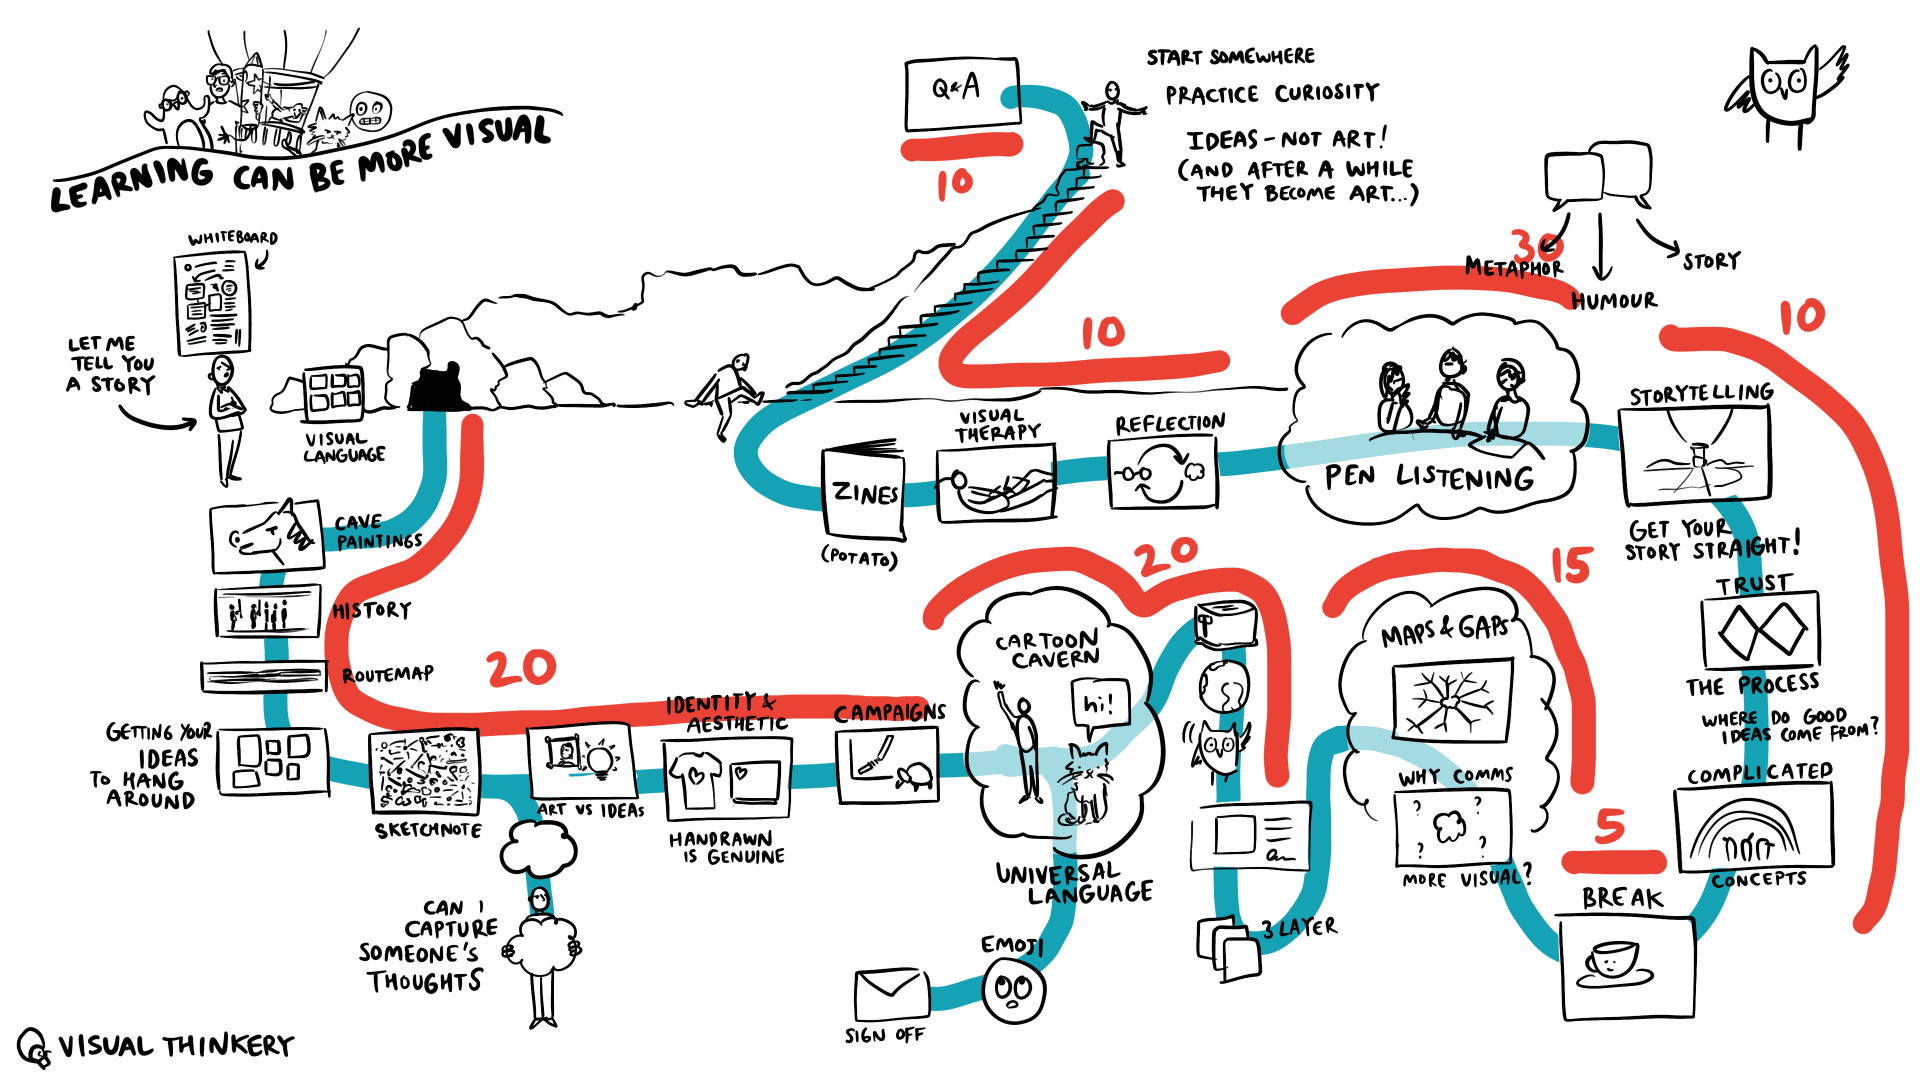 A map of the workshop with timings